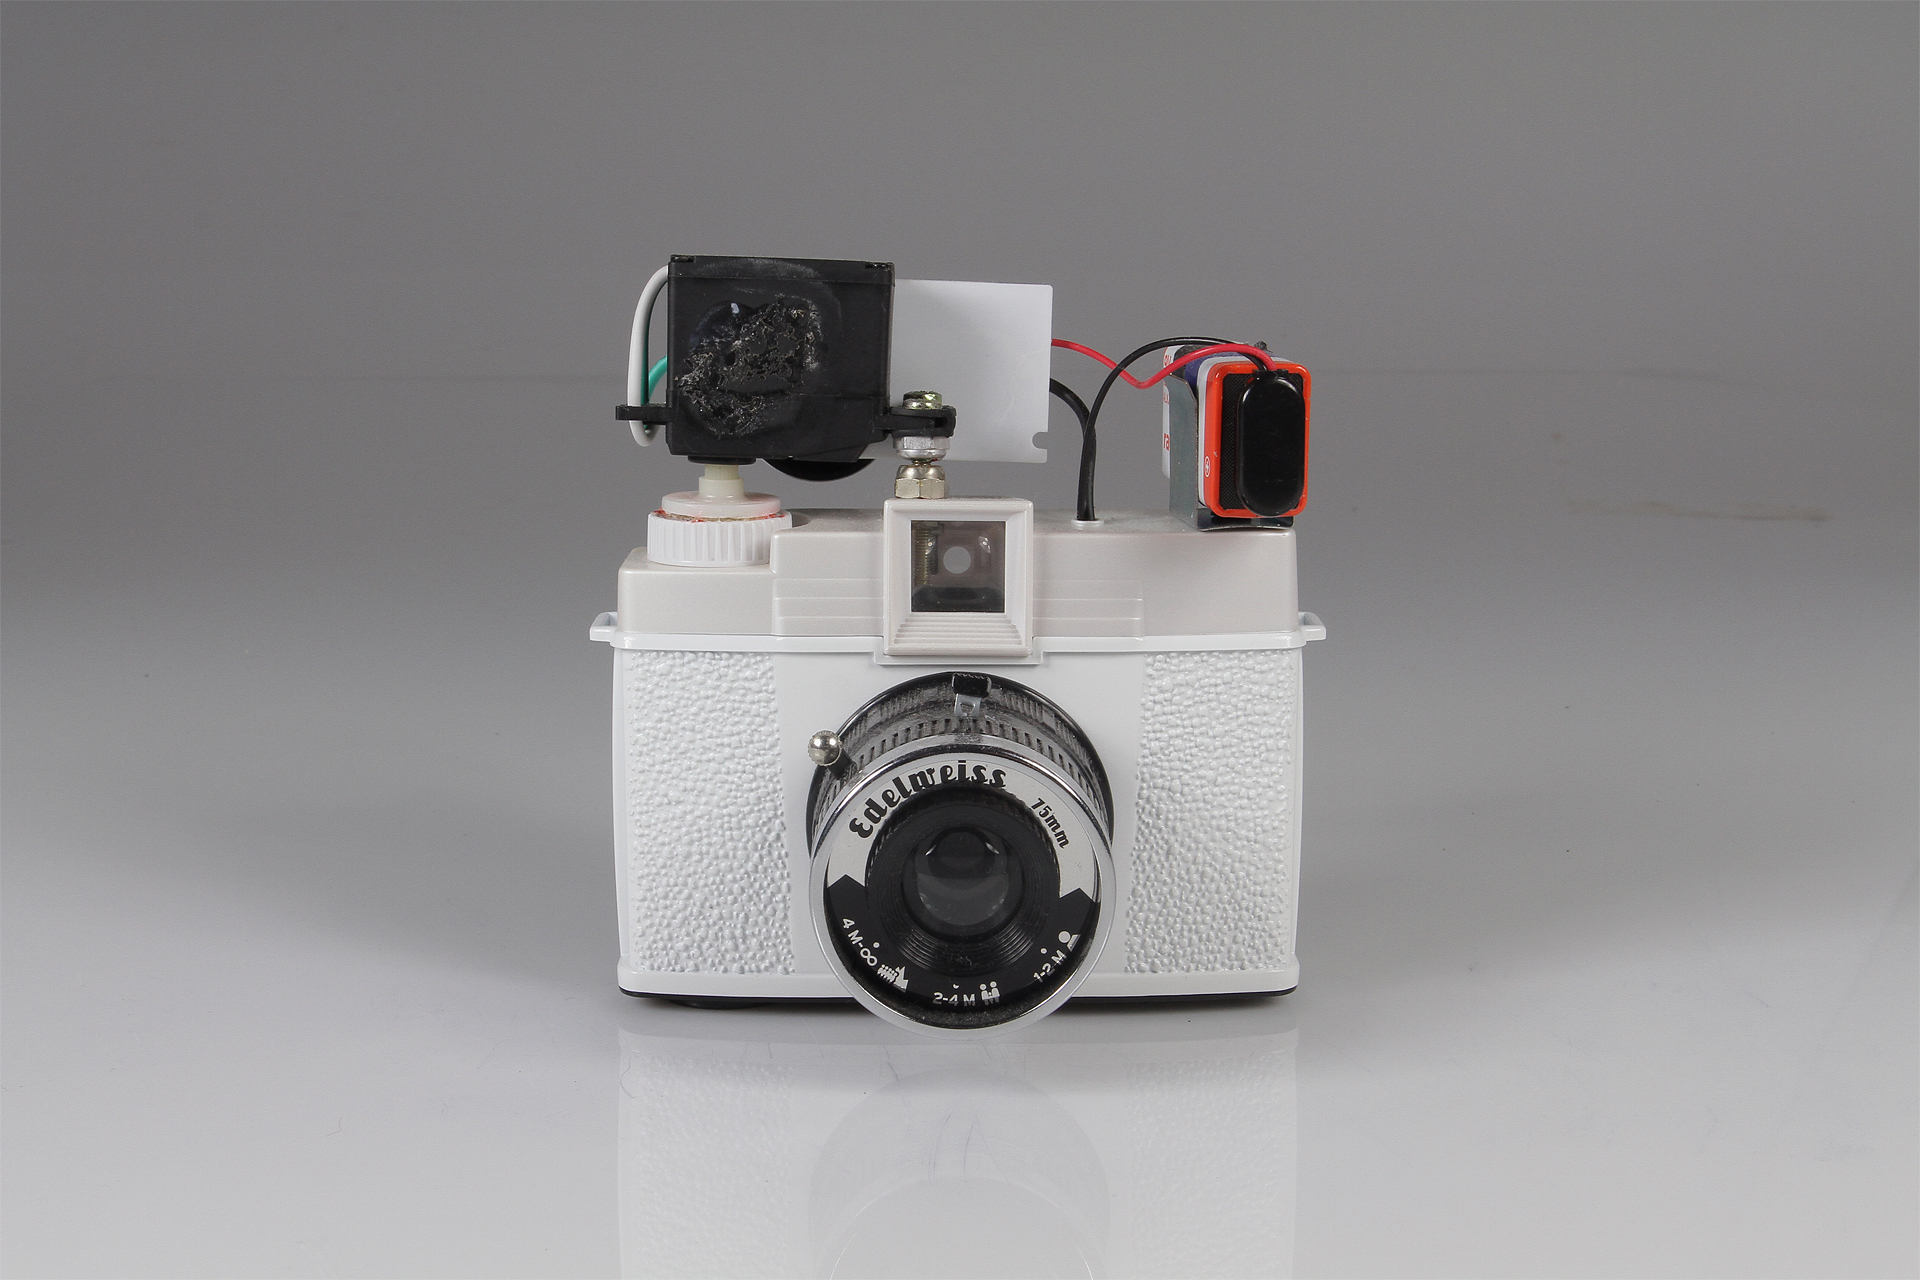   Diana Slitscan Camera  2016.&nbsp; Modified Diana+ with 35mm film back for Strip Photography.&nbsp; Diana+ camera, modified servo motor, pulse-width modulation circuit (for motor speed control), 9v battery, battery clip, electrical wire, salvaged n